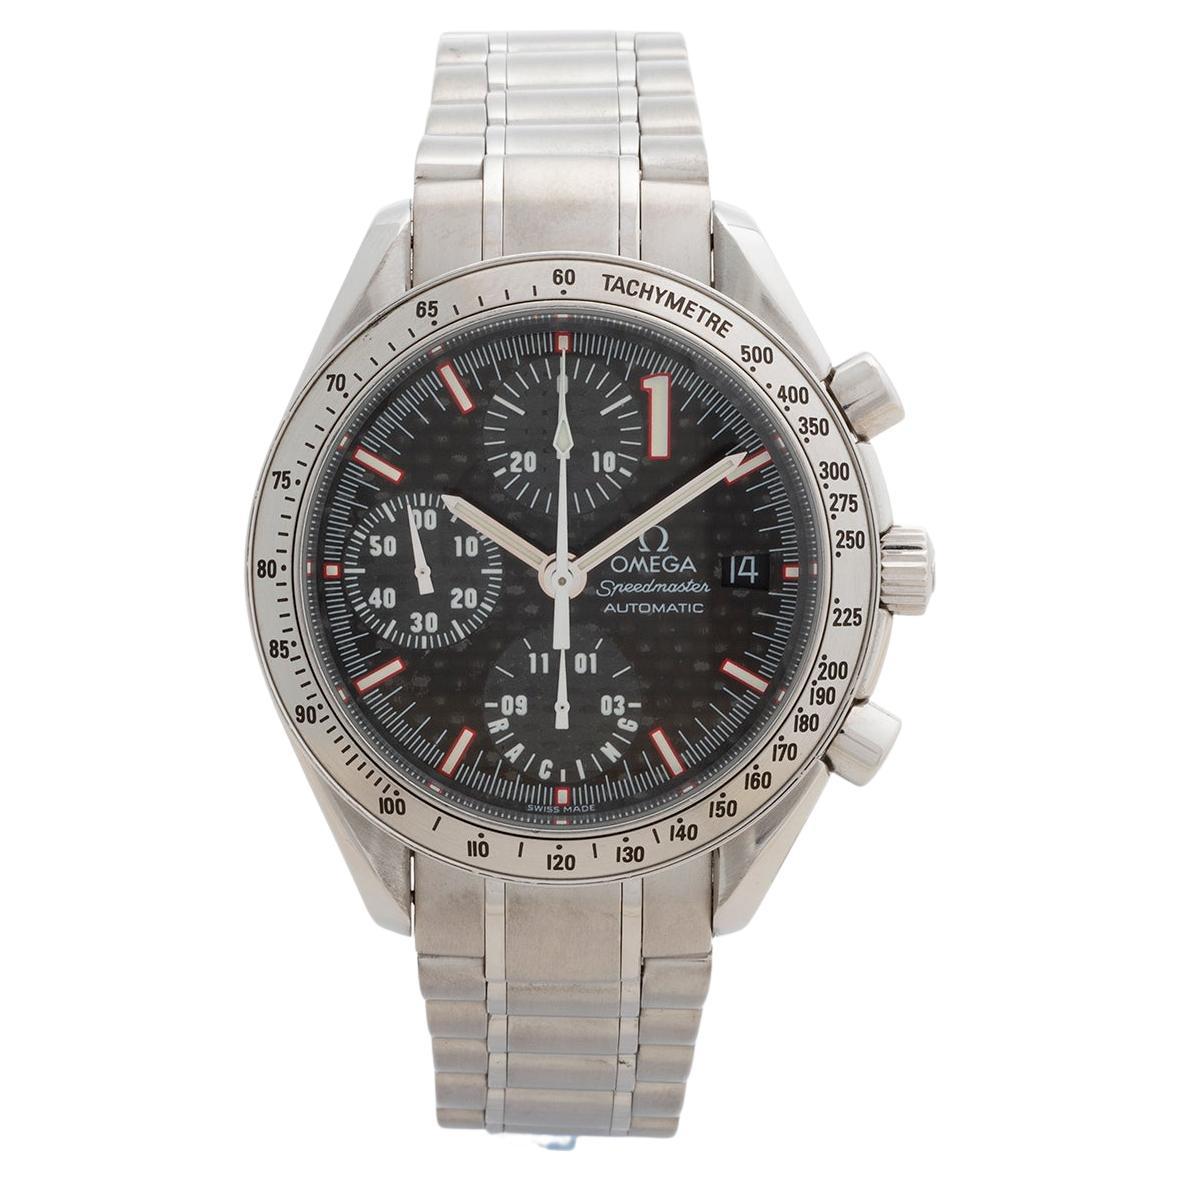 What is the Omega Speedmaster Reduced?